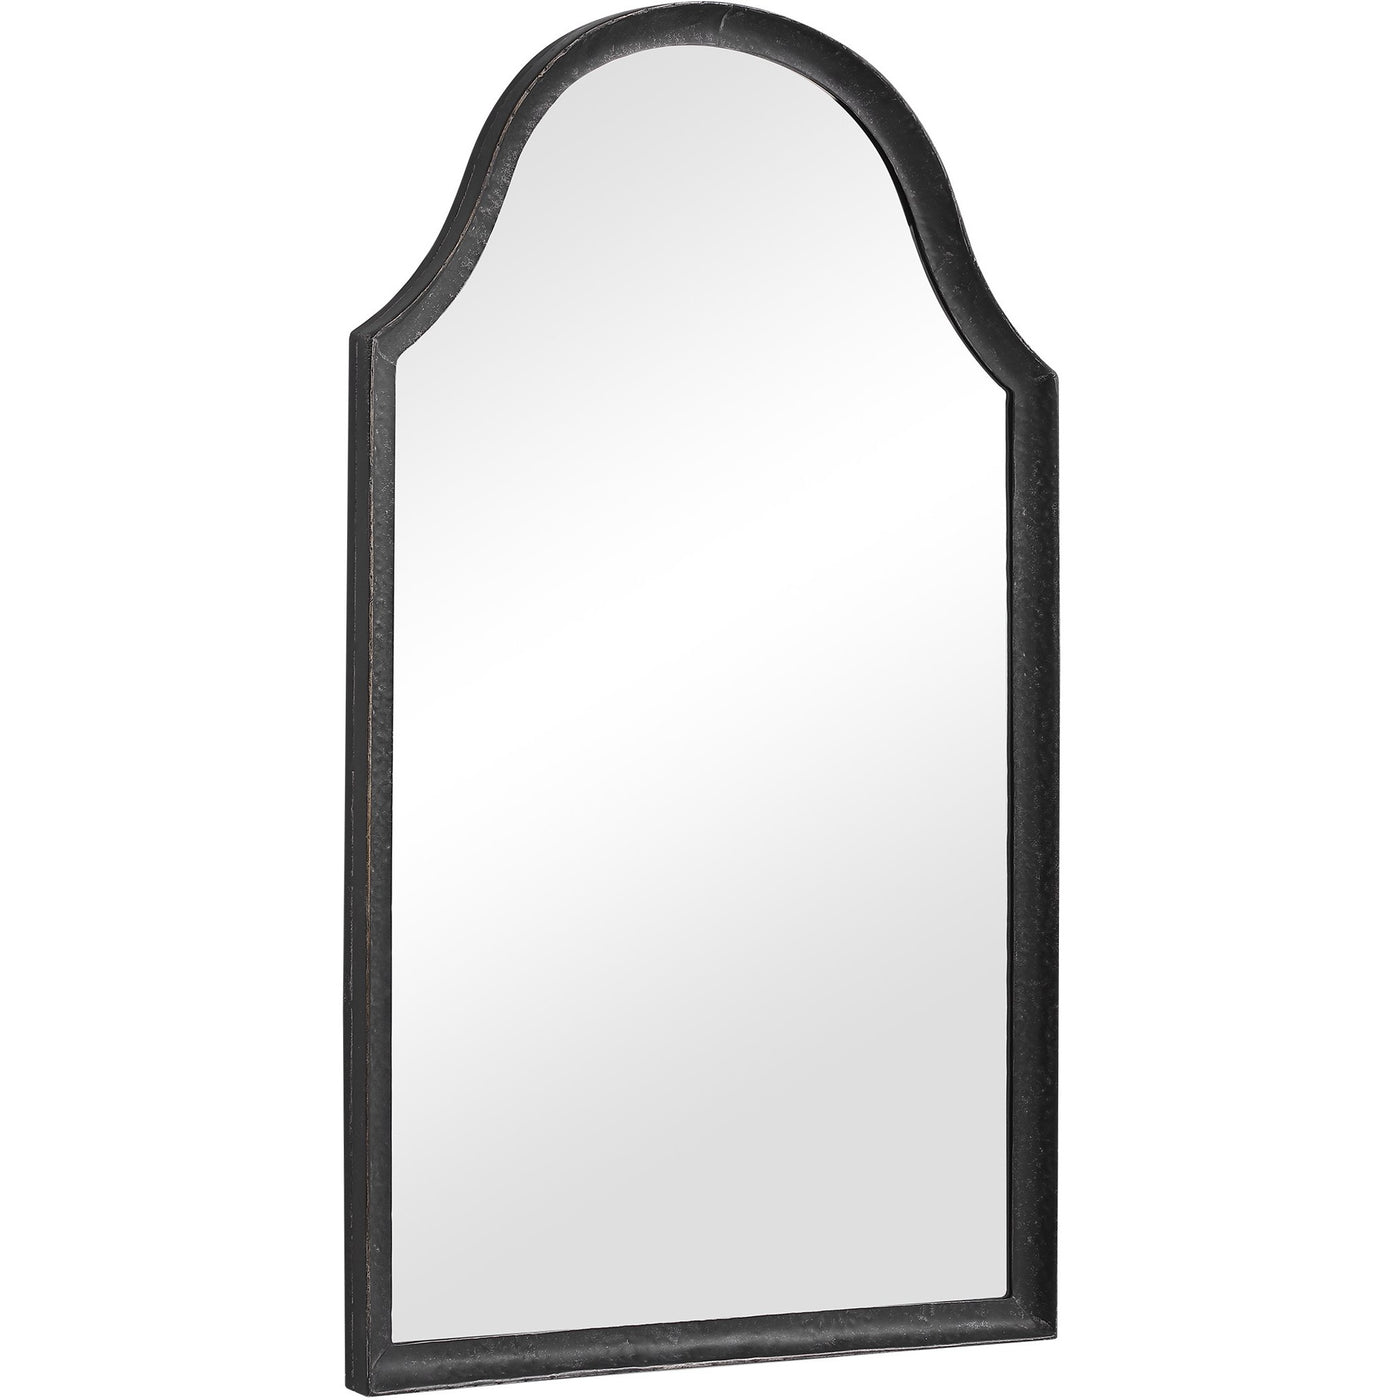 The Perryville - Arch Top Decorative Wall Mirror - Glass.com